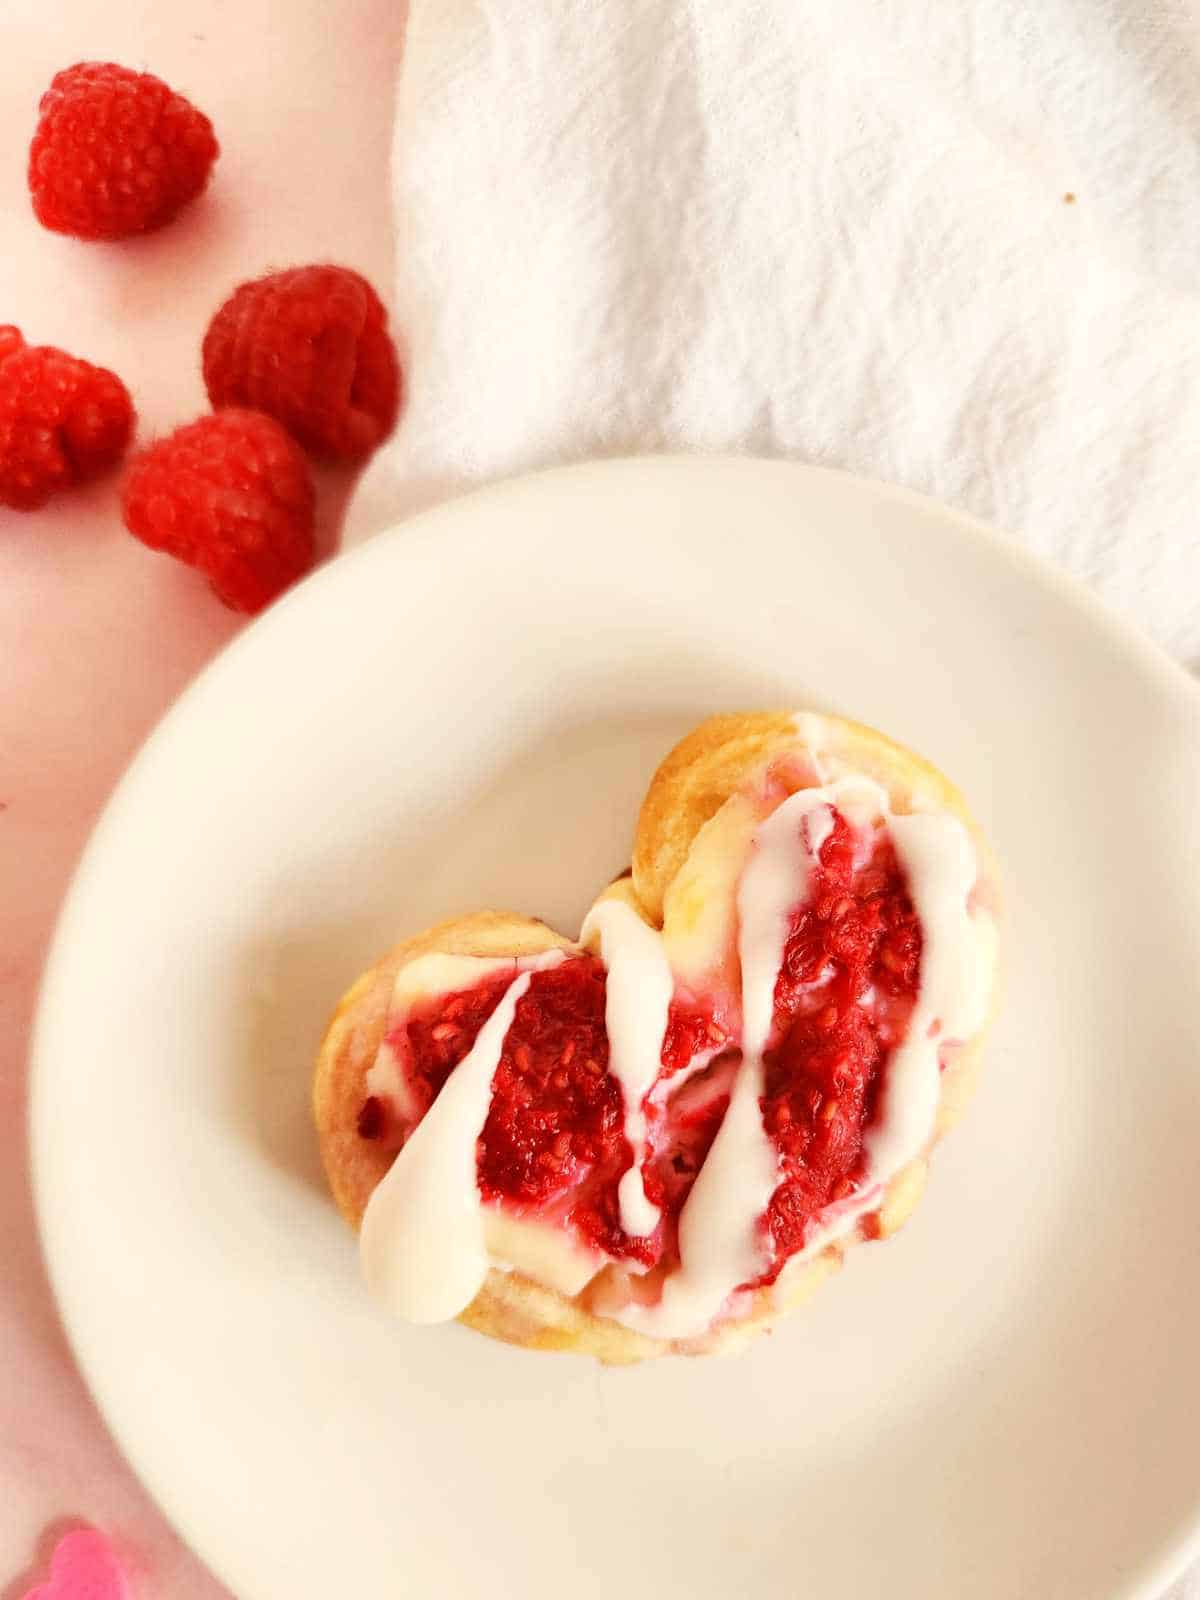 crescent roll cheese & raspberry danish with icing drizzled on top.